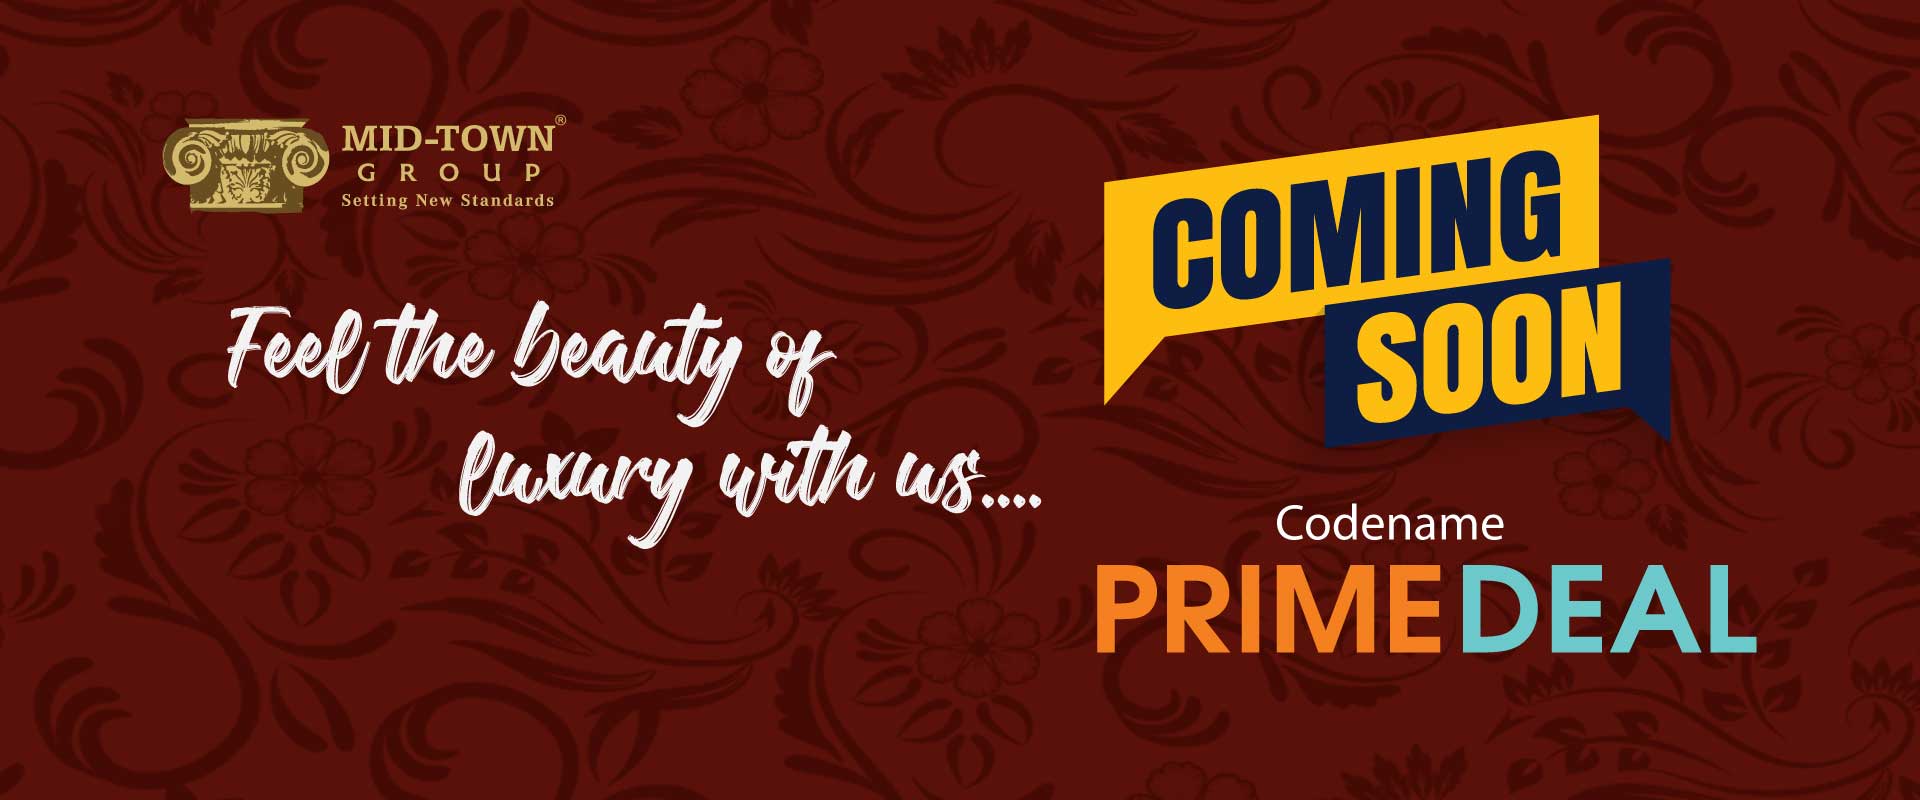 codename prime deal 1 bhk | Kalyan new project